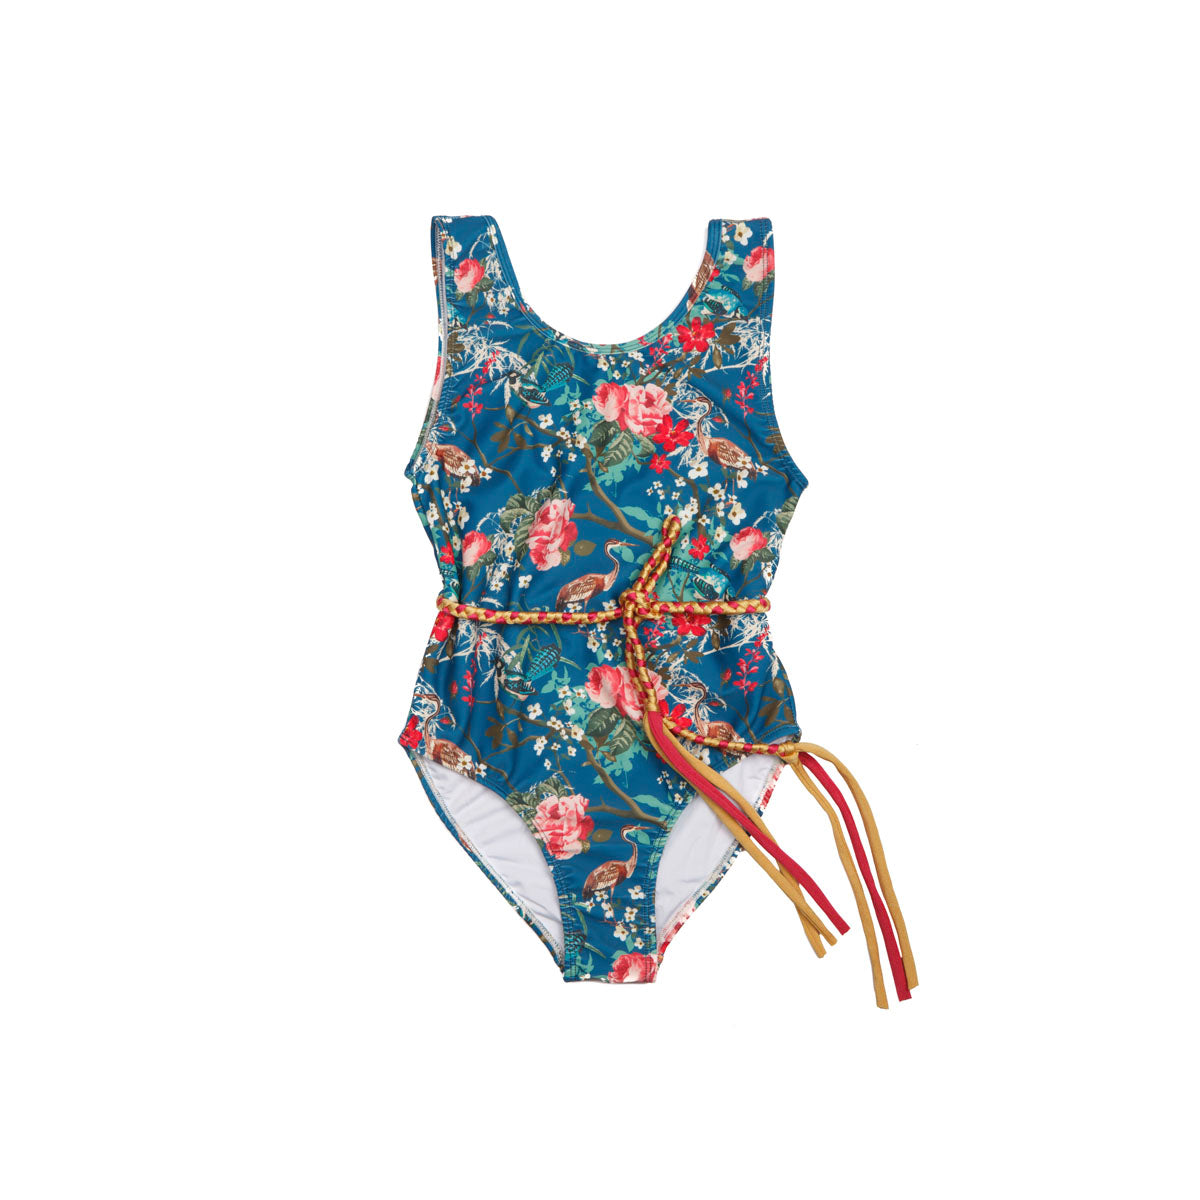 Girls Navy Floral One Piece Swimsuit with Tie - Front